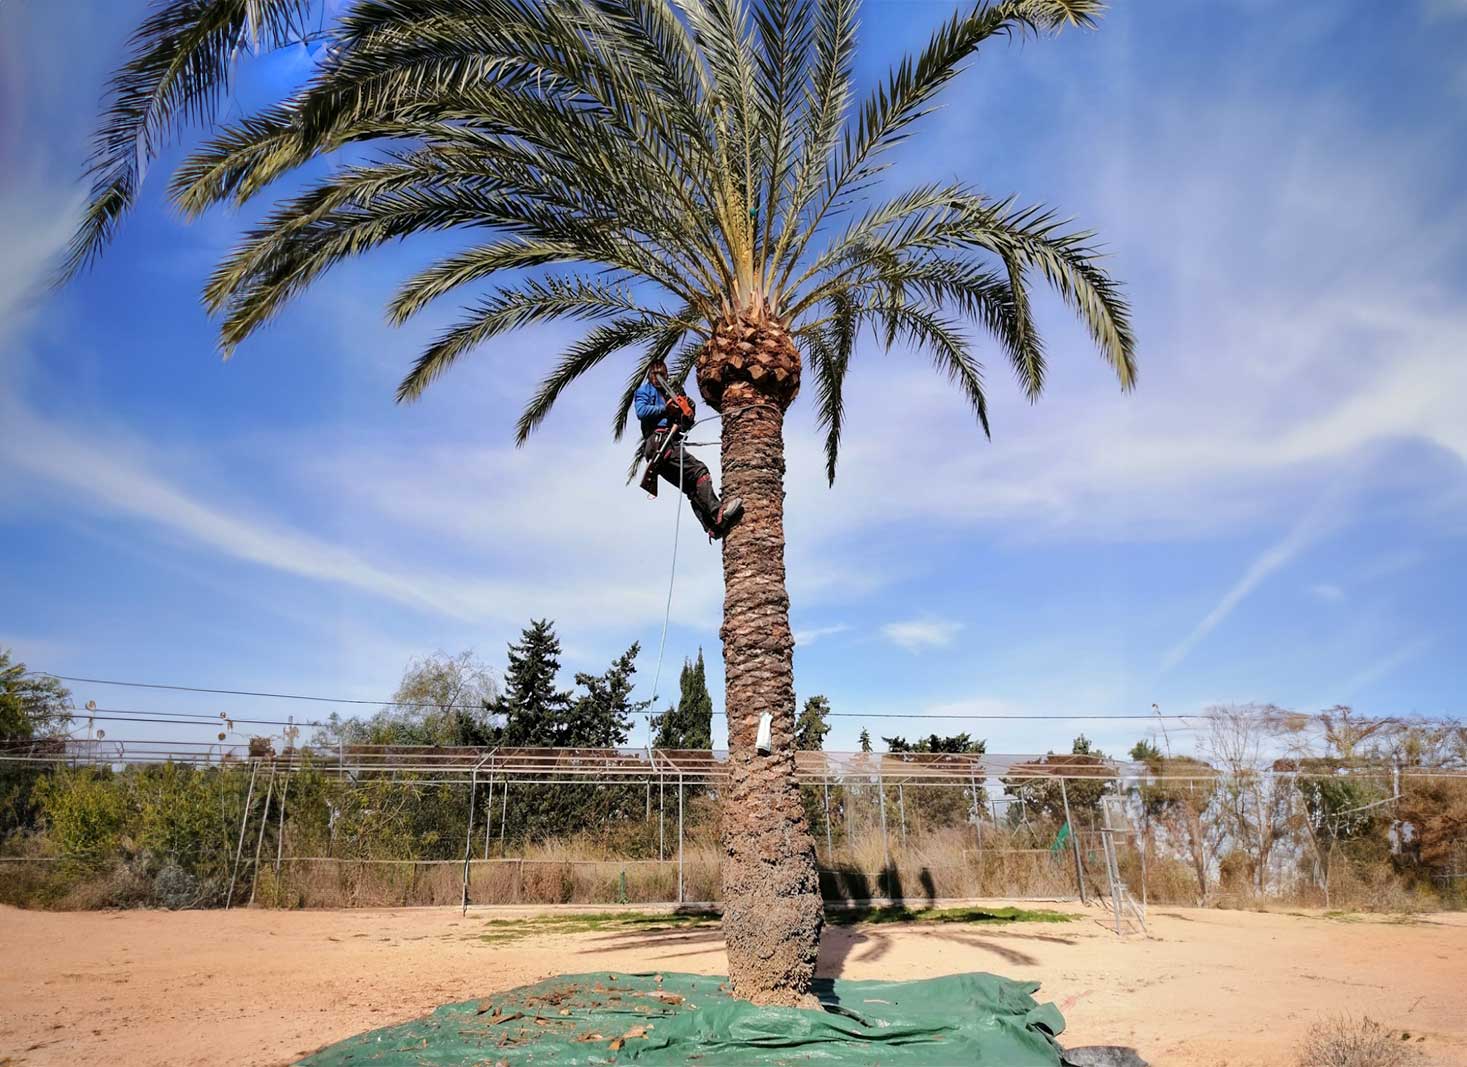 A professional tree trimmer in San Diego trimming a palm tree